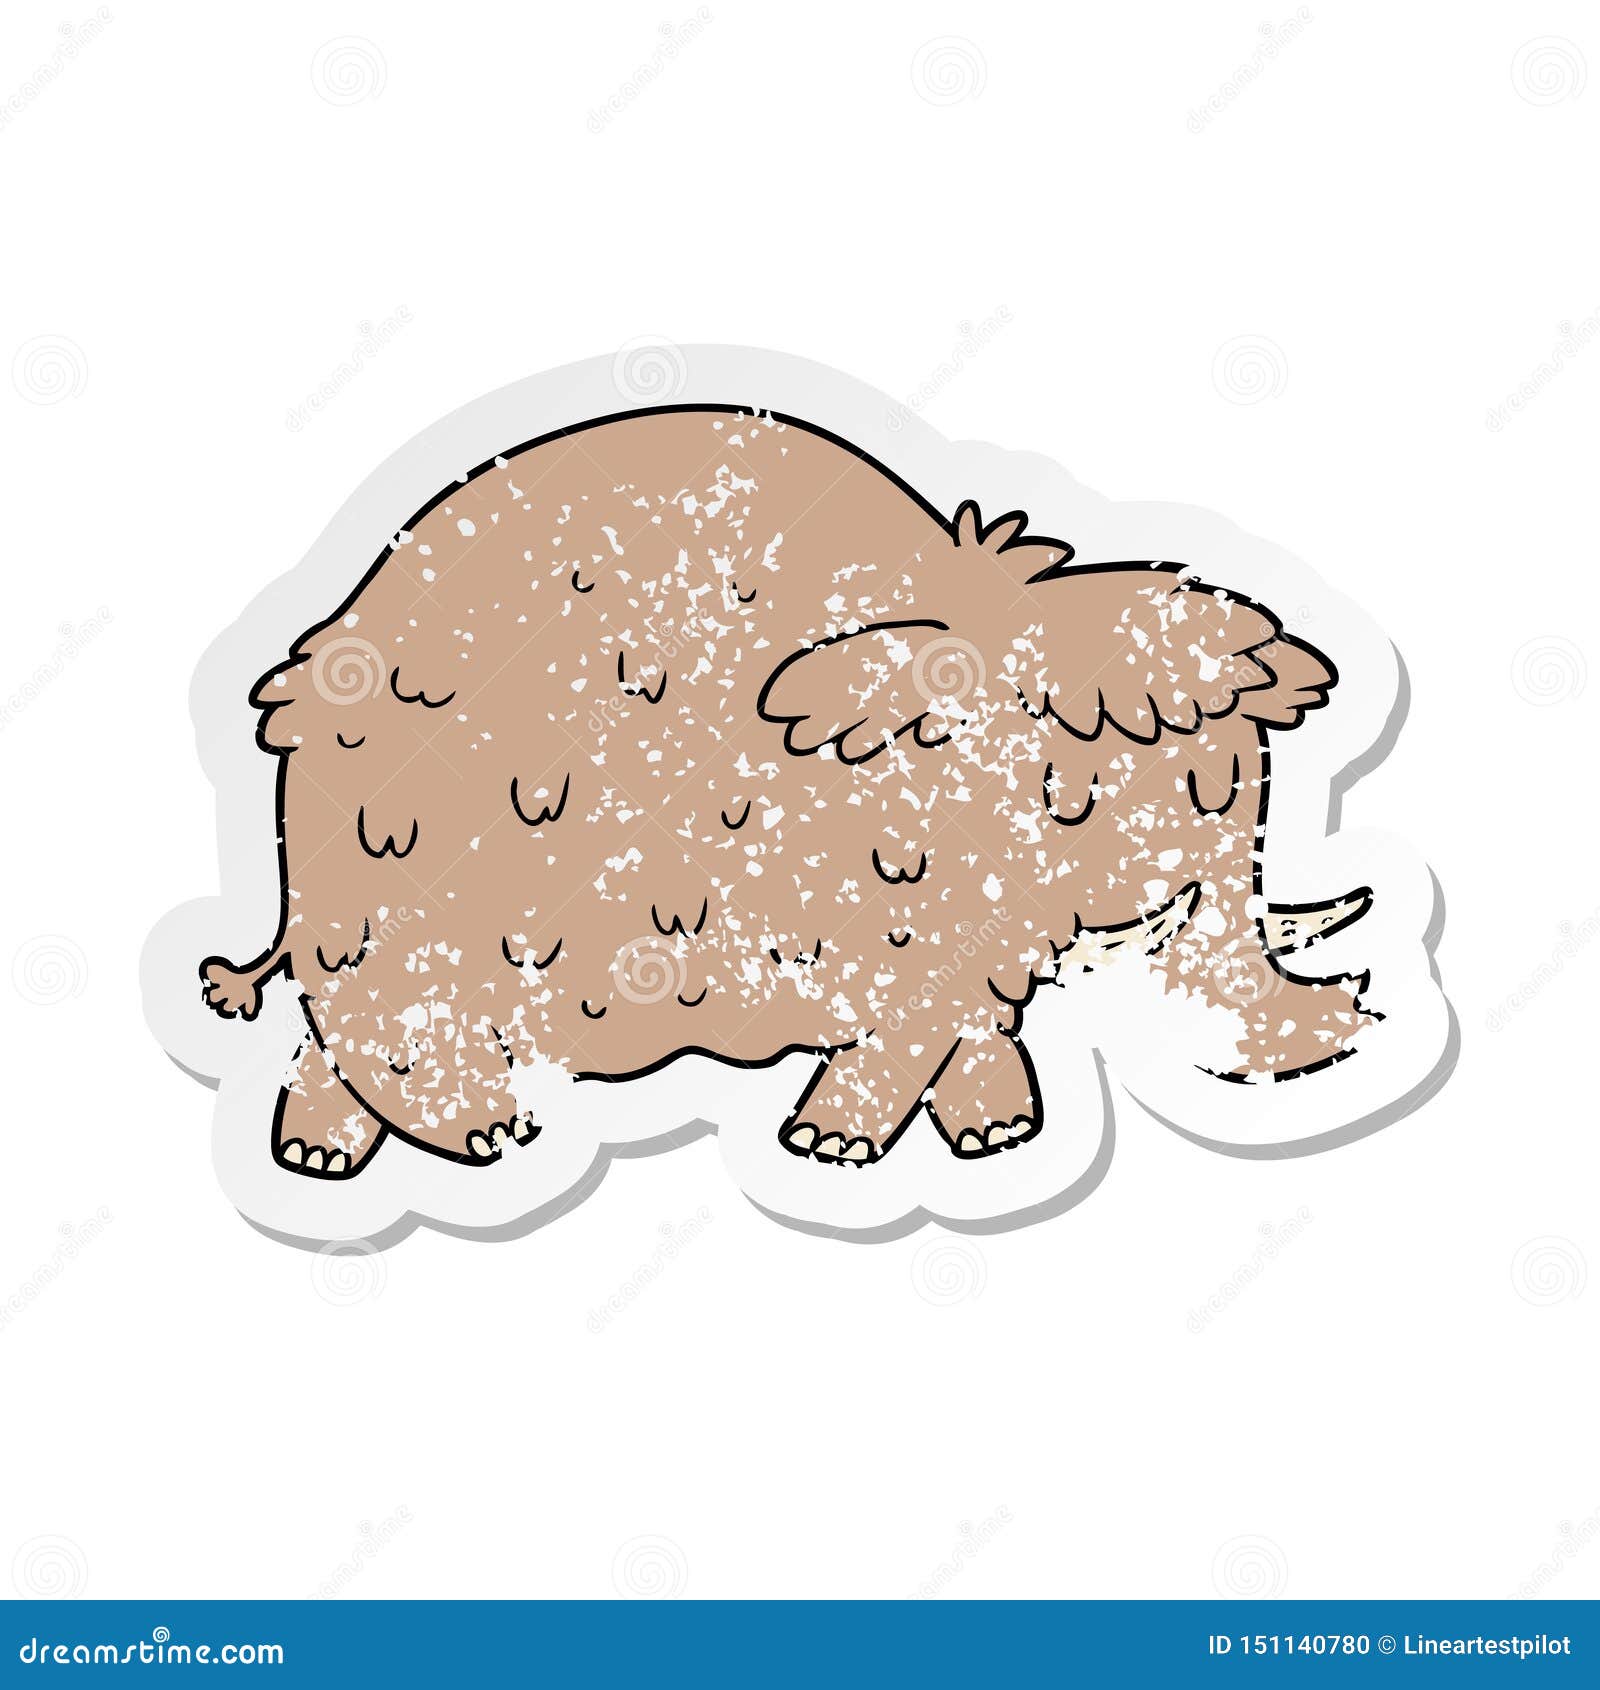 Mammoth Elephant Extinct Prehistoric Animals Cartoon Sticker Stick Icon  Decal Label Drawing Illustration Retro Doodle Freehand Free Hand Drawn  Quirky Art Artwork Funny Character Stock Illustrations – 8 Mammoth Elephant  Extinct Prehistoric